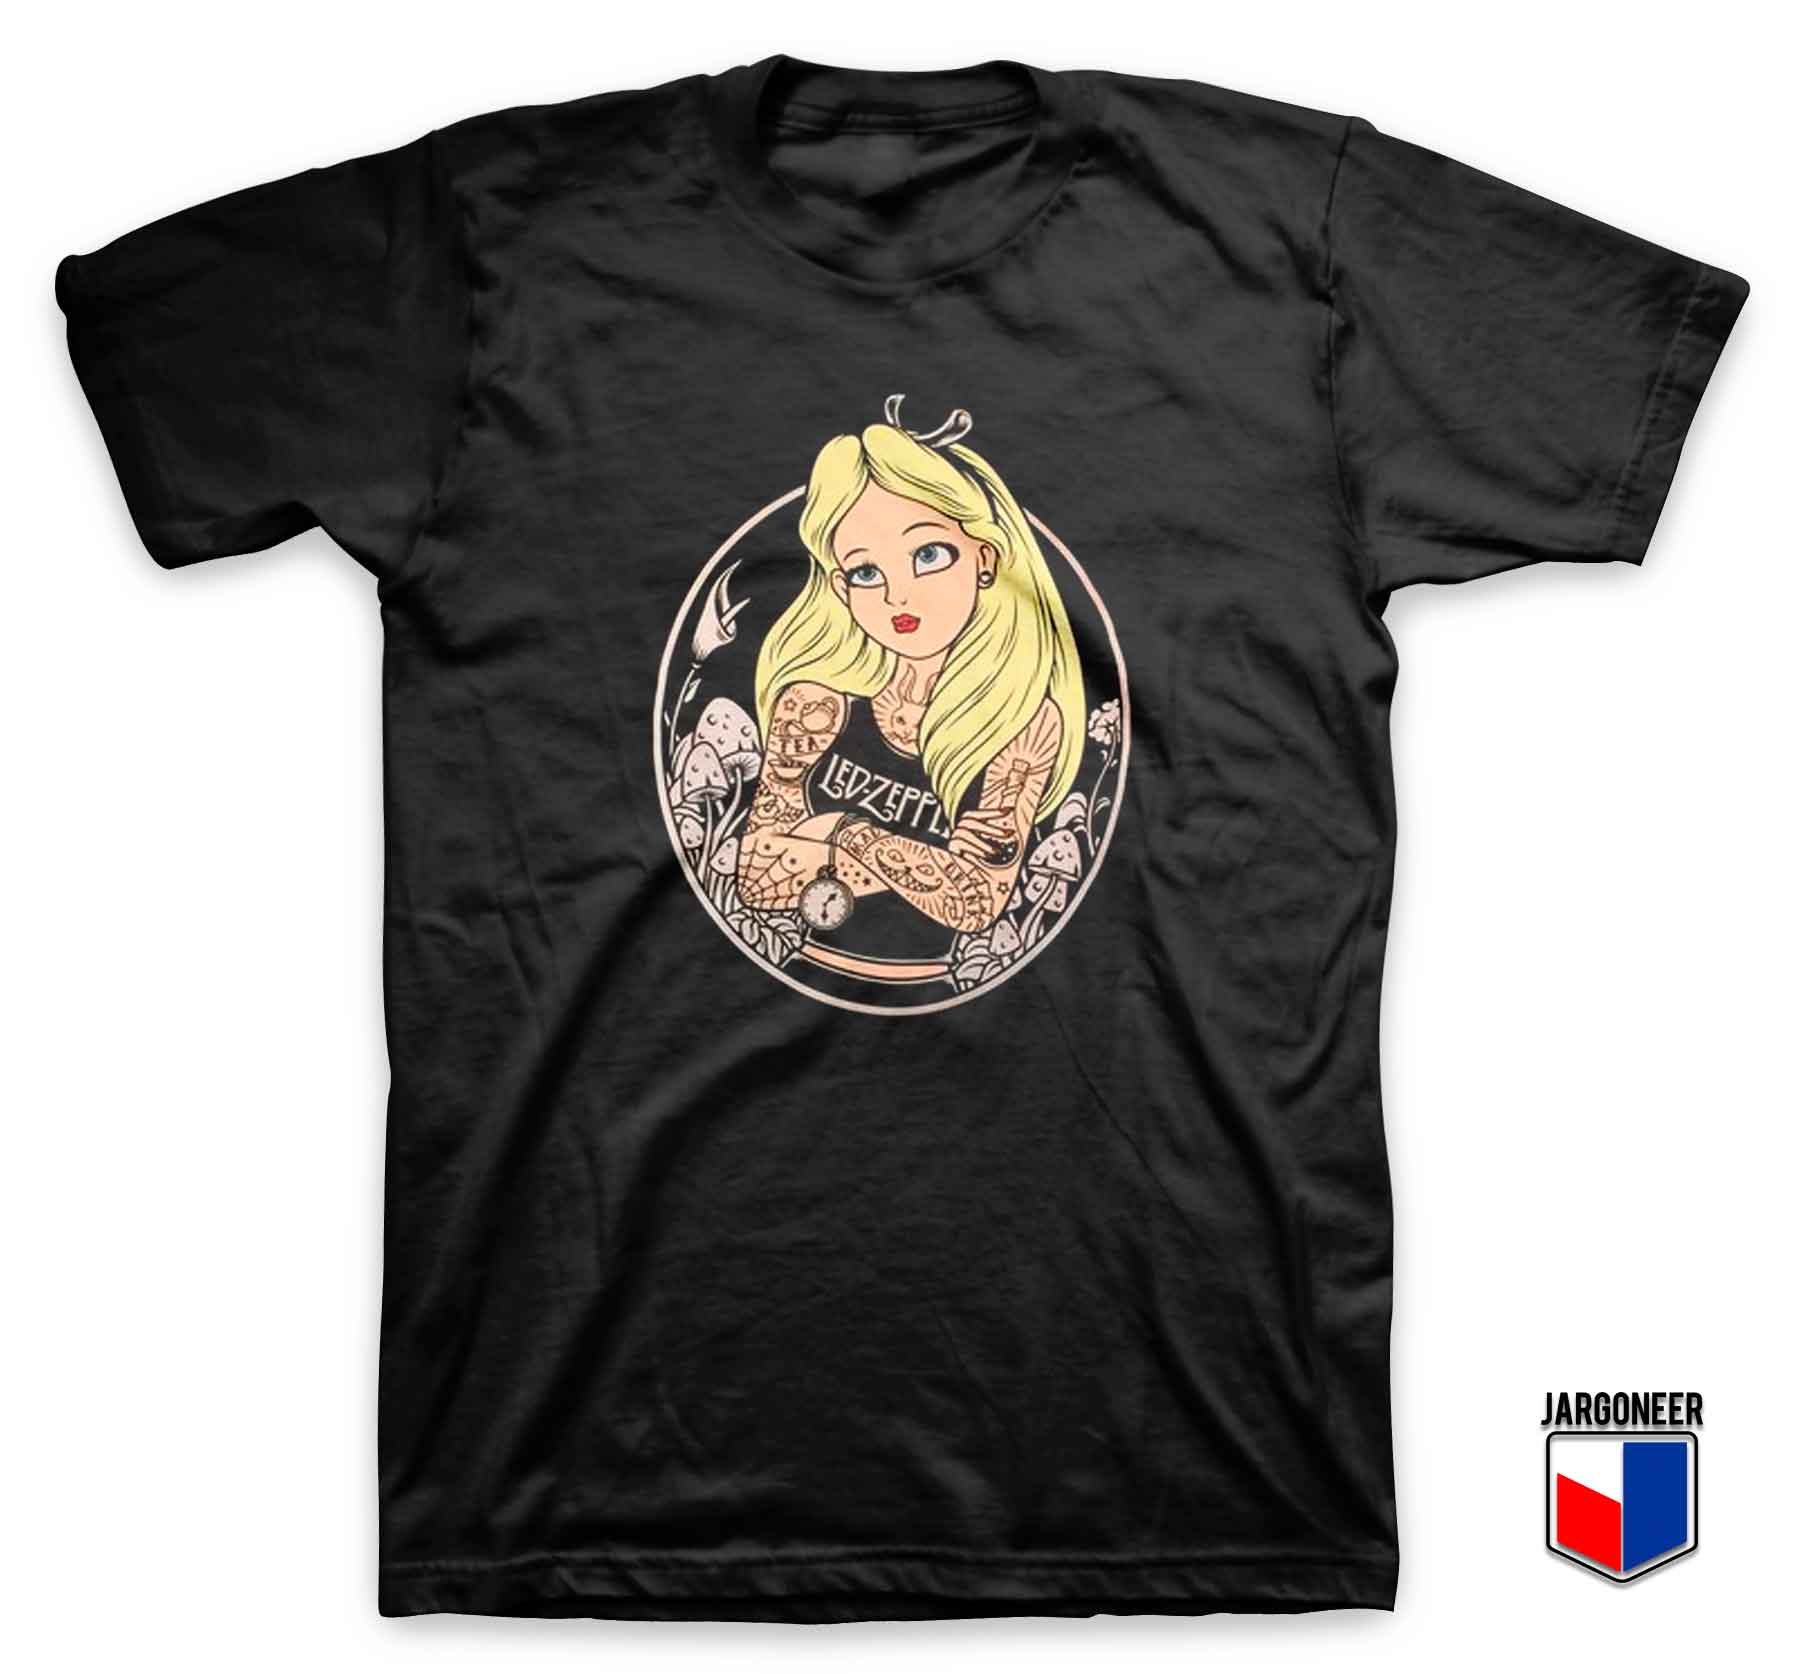 Alice With Tattoos - Shop Unique Graphic Cool Shirt Designs